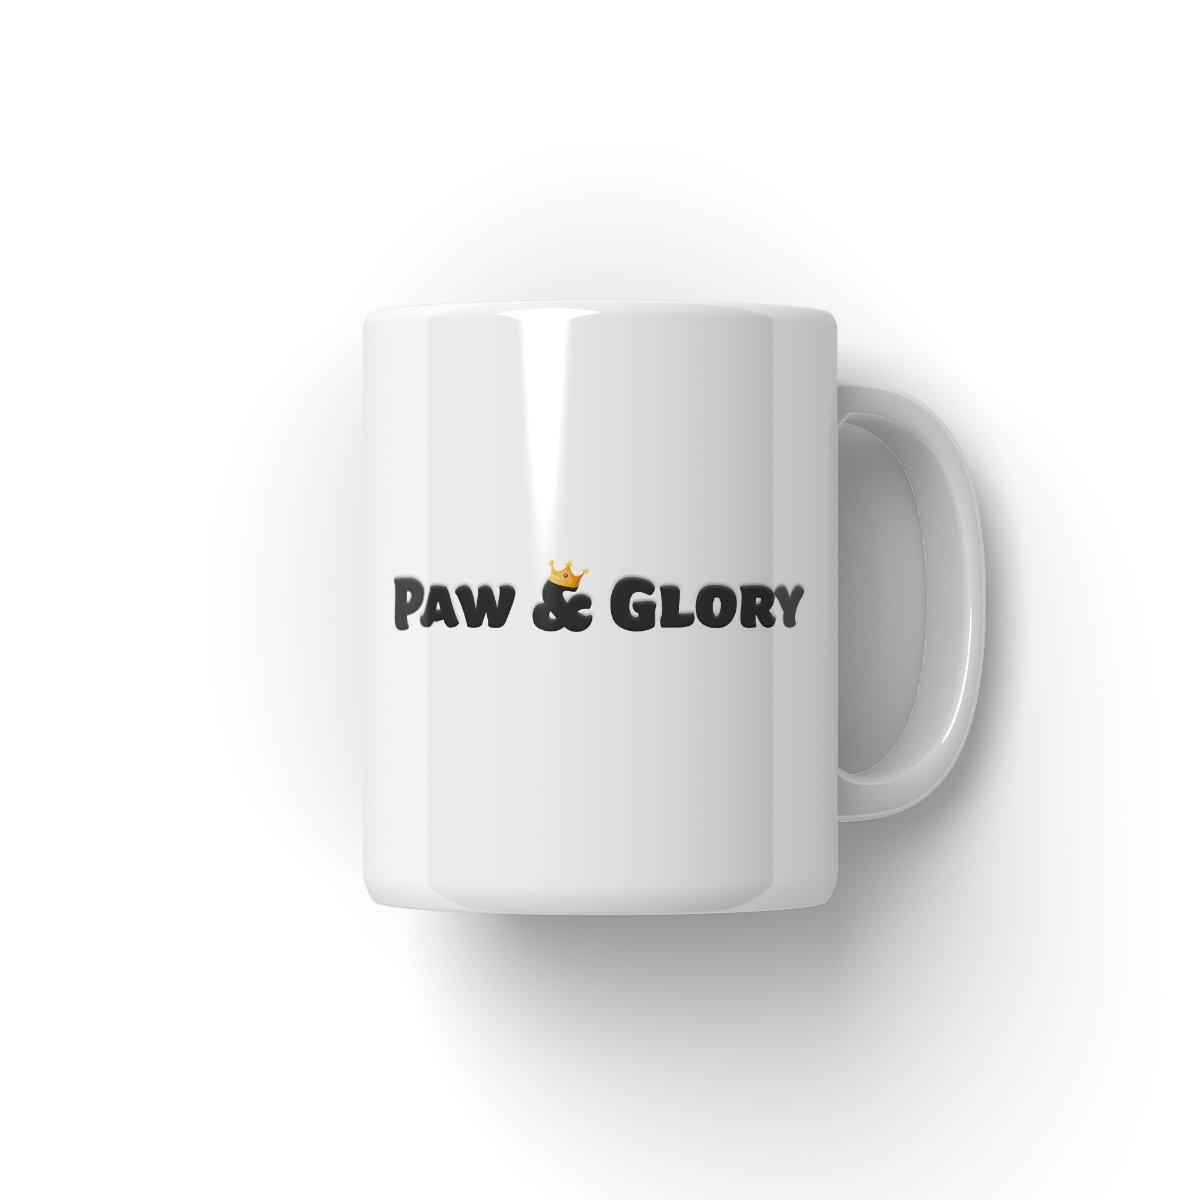 The Midwifes (Call The Midwife Inspired): Custom Pet Mug - Paw & Glory - #pet portraits# - #dog portraits# - #pet portraits uk#paw & glory, custom pet portrait Mug,dog coffee mug custom, personalized coffee mugs with pets, coffee mug with dogs, mug with dogs face on it, personalised mugs dogs